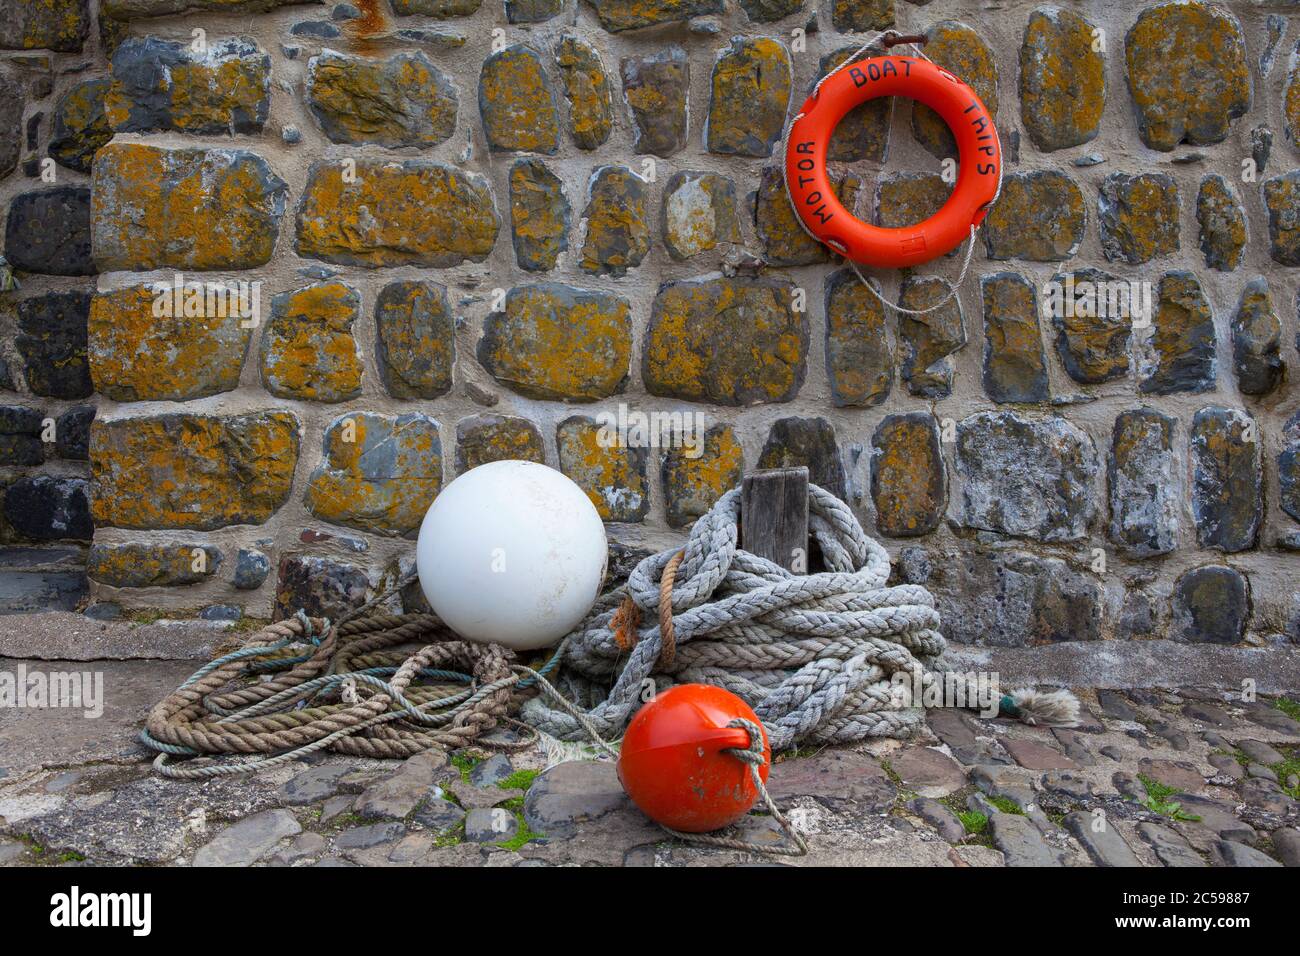 Rope, life ring and buoys on the stone harbour wall at Clovelly, North Devon. Stock Photo